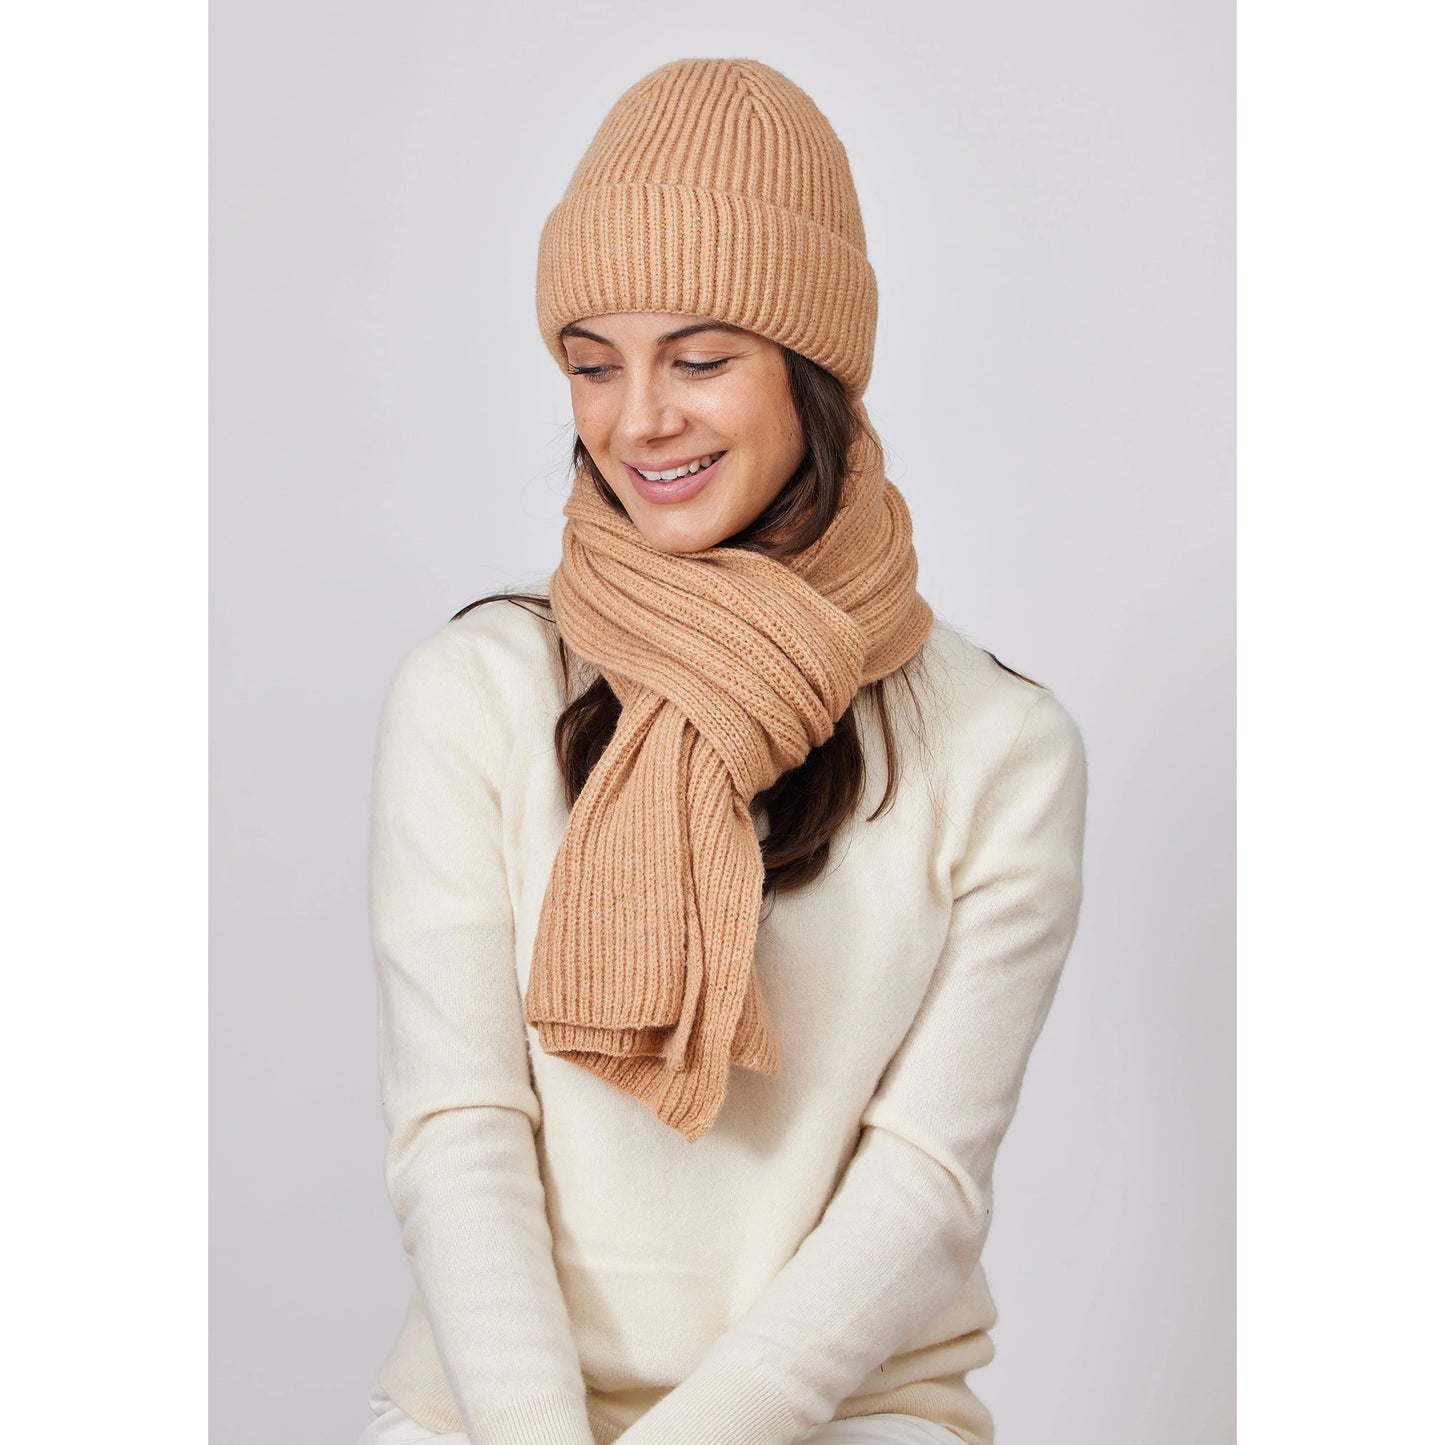 Match Rib Beanie Hat (Select Color)